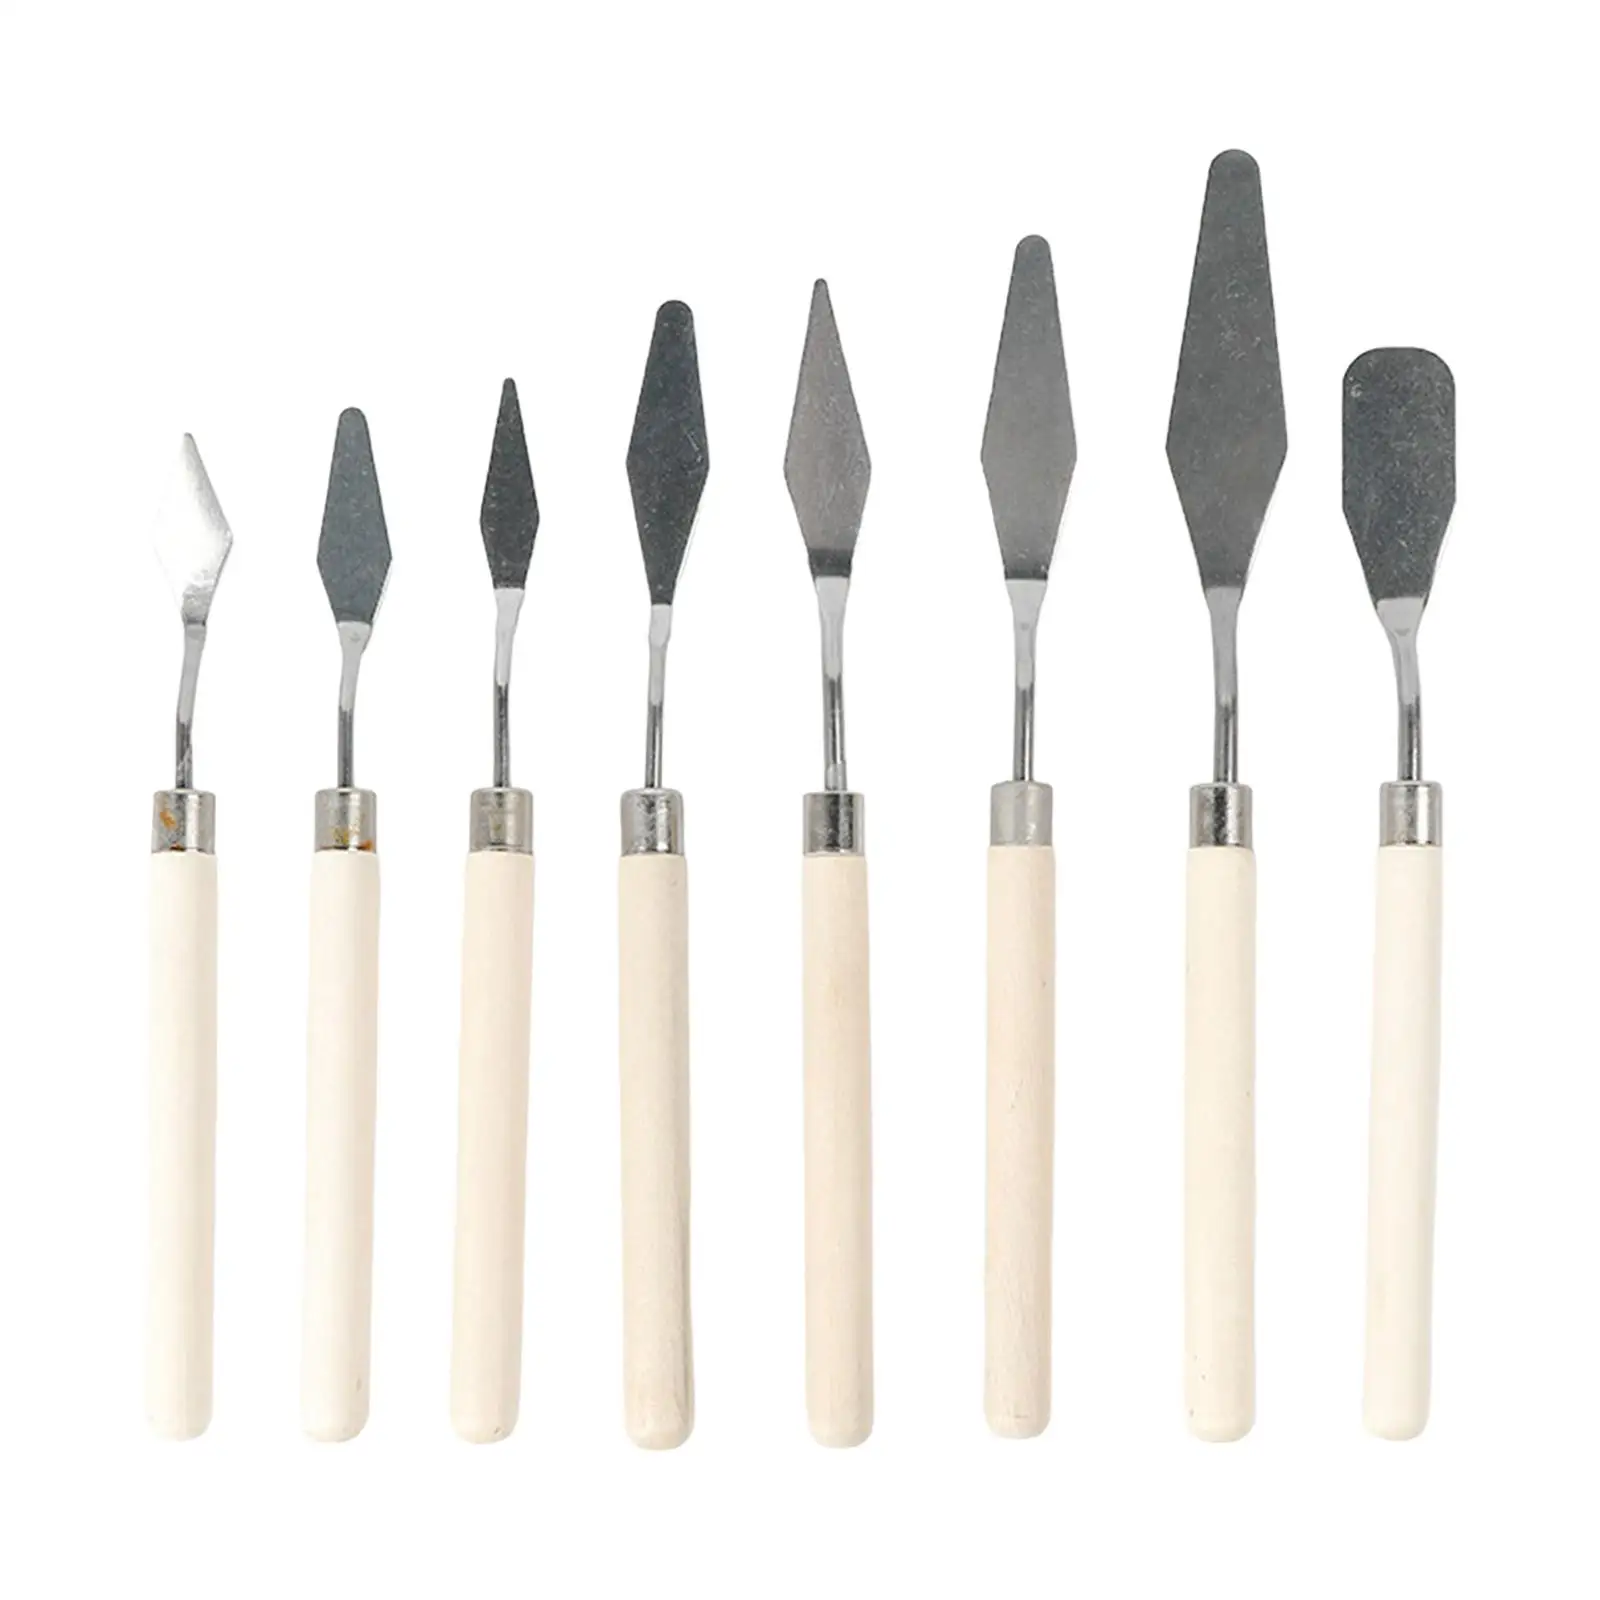 8 Pieces Stainless Steel Painting Knives Set Smearing Color Mixing Scraper Palette Knife for Watercolor Oil Canvas Acrylic Paint